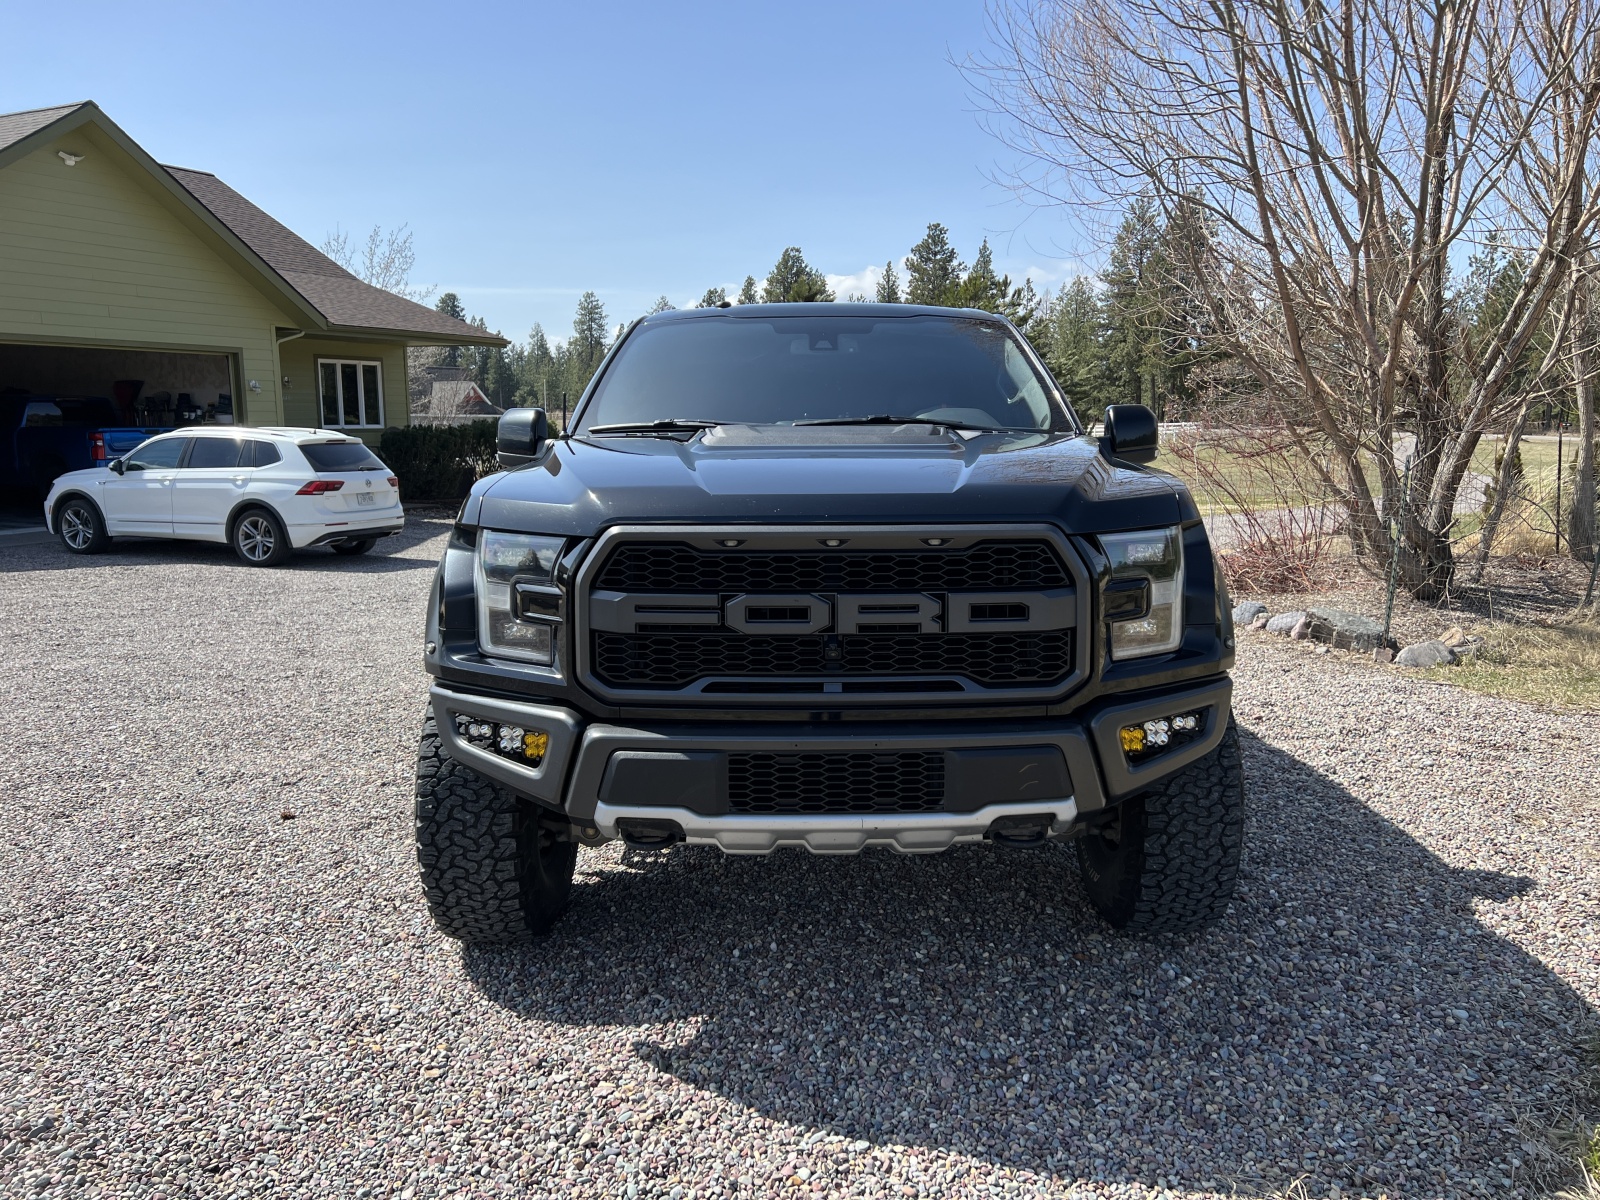 For Sale: 2018 F150 Raptor on 37's - photo4